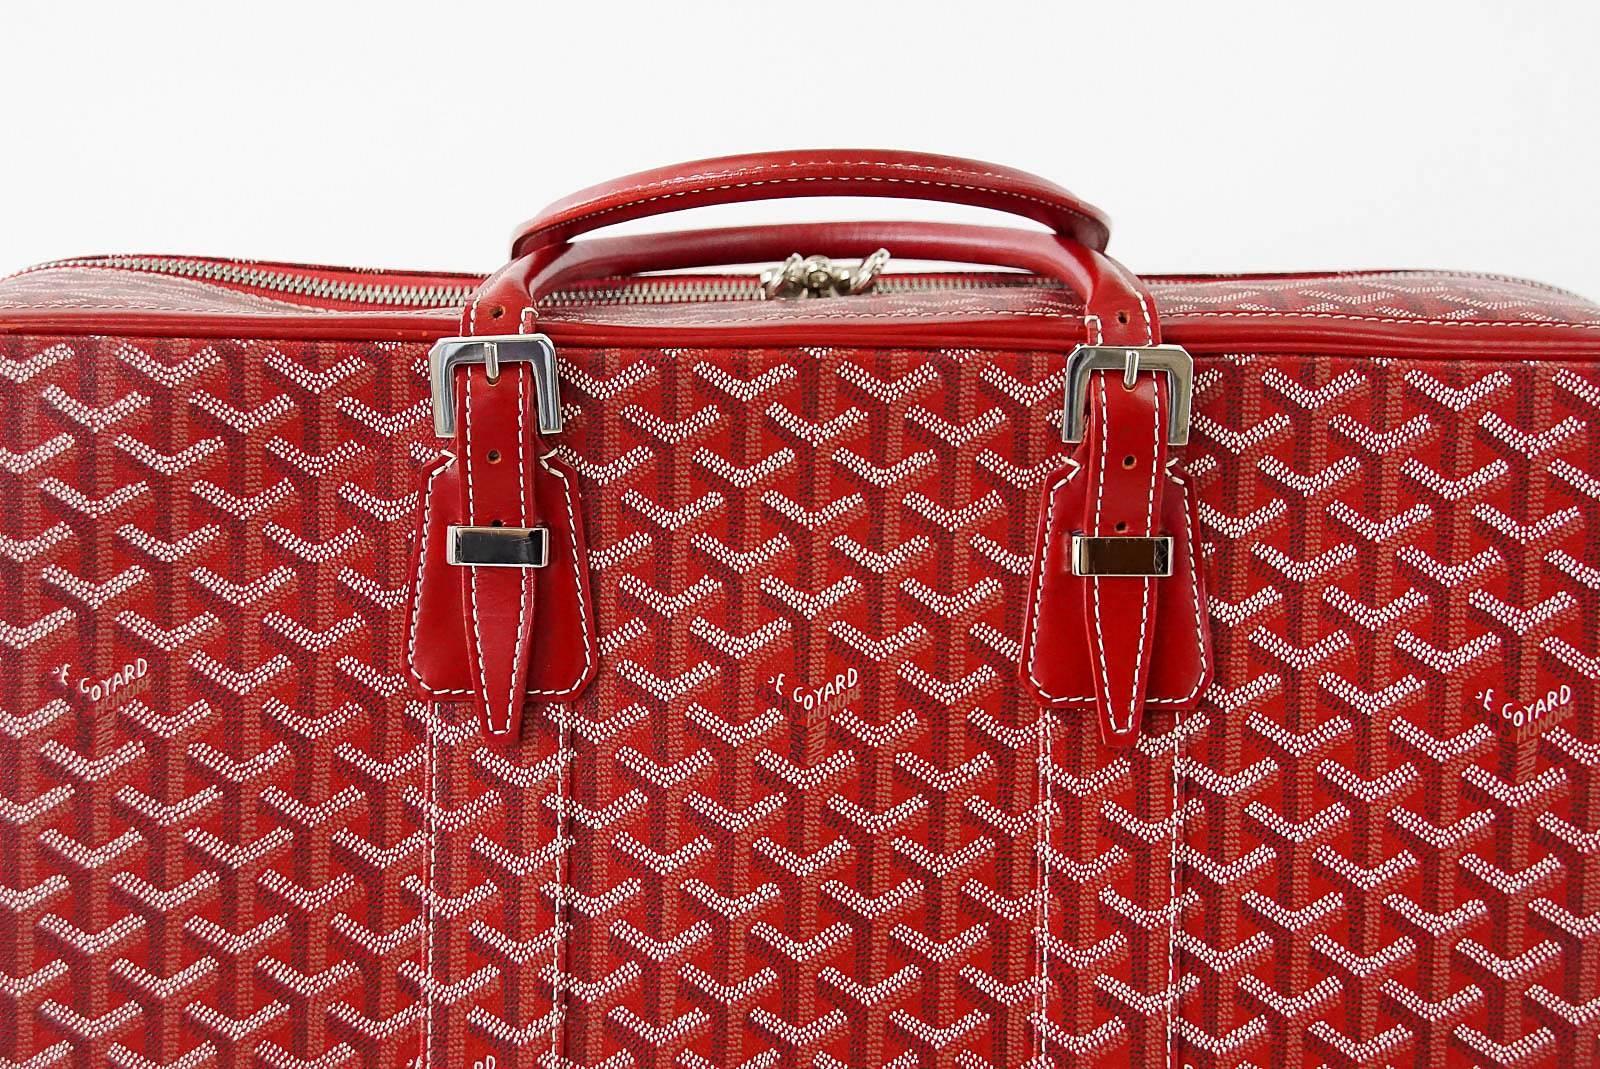 Guaranteed authentic Goyard red signature monogram soft sided zip around suitcase.  
Comes with palladium fittings, lock and keys.
Case interior has a back slot pocket with leather closure and small zip pocket.
Interior is lined in signature yellow